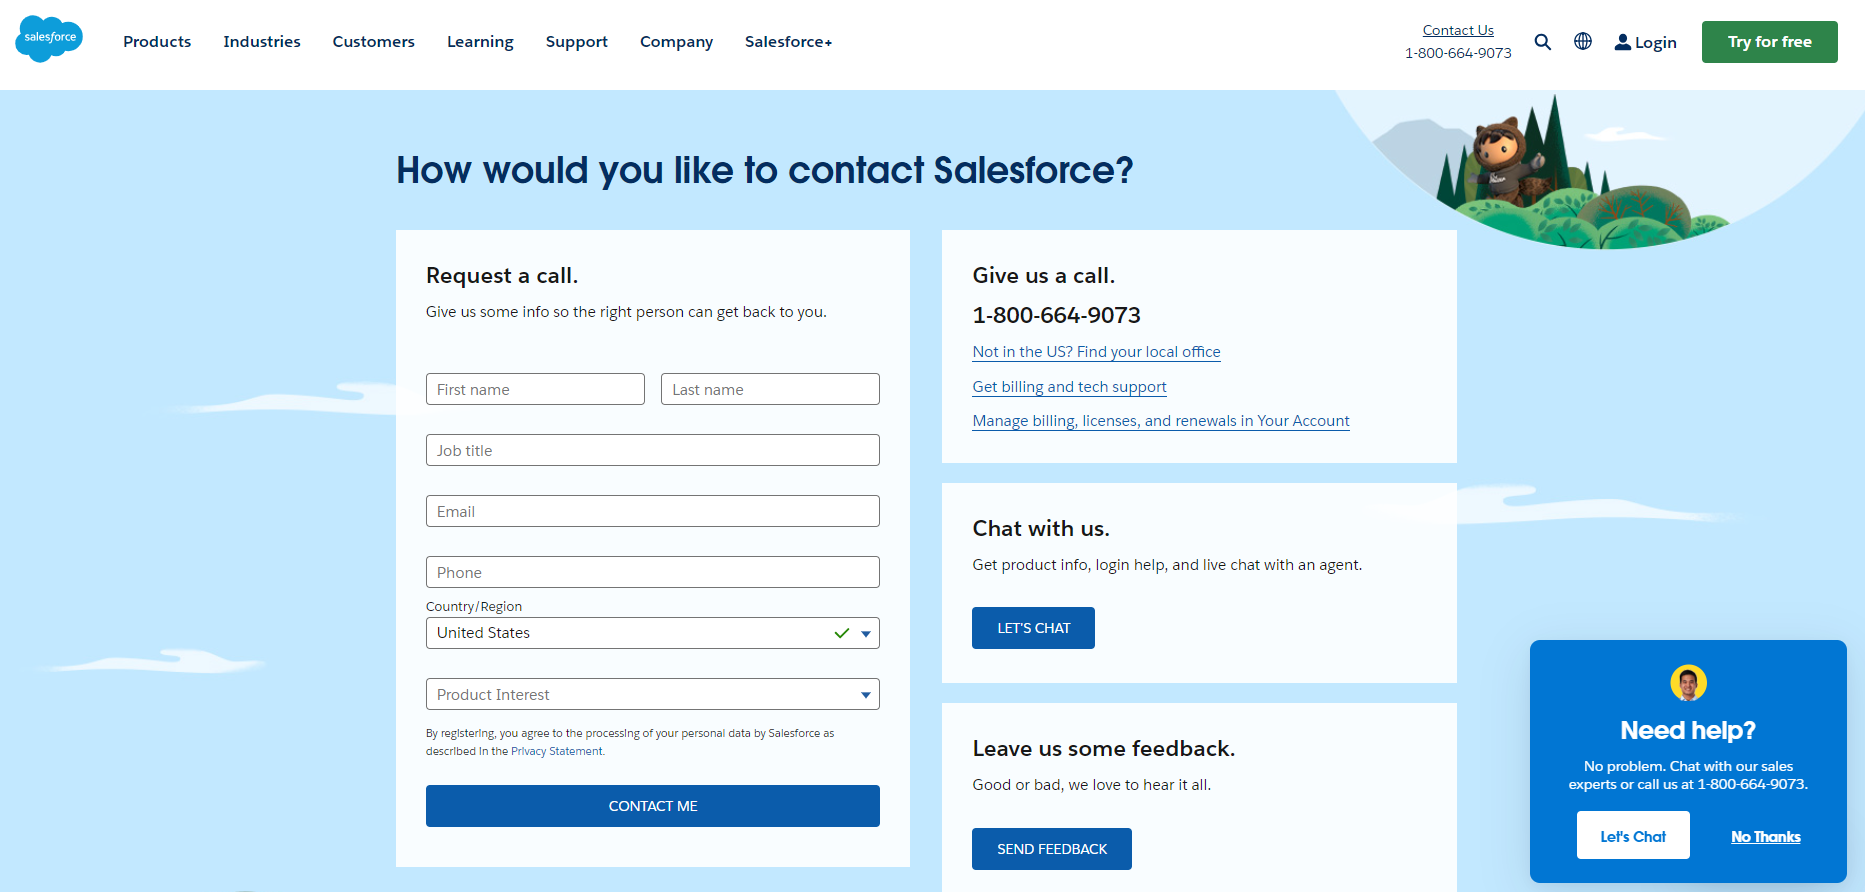 Salesforce Contact Us Page